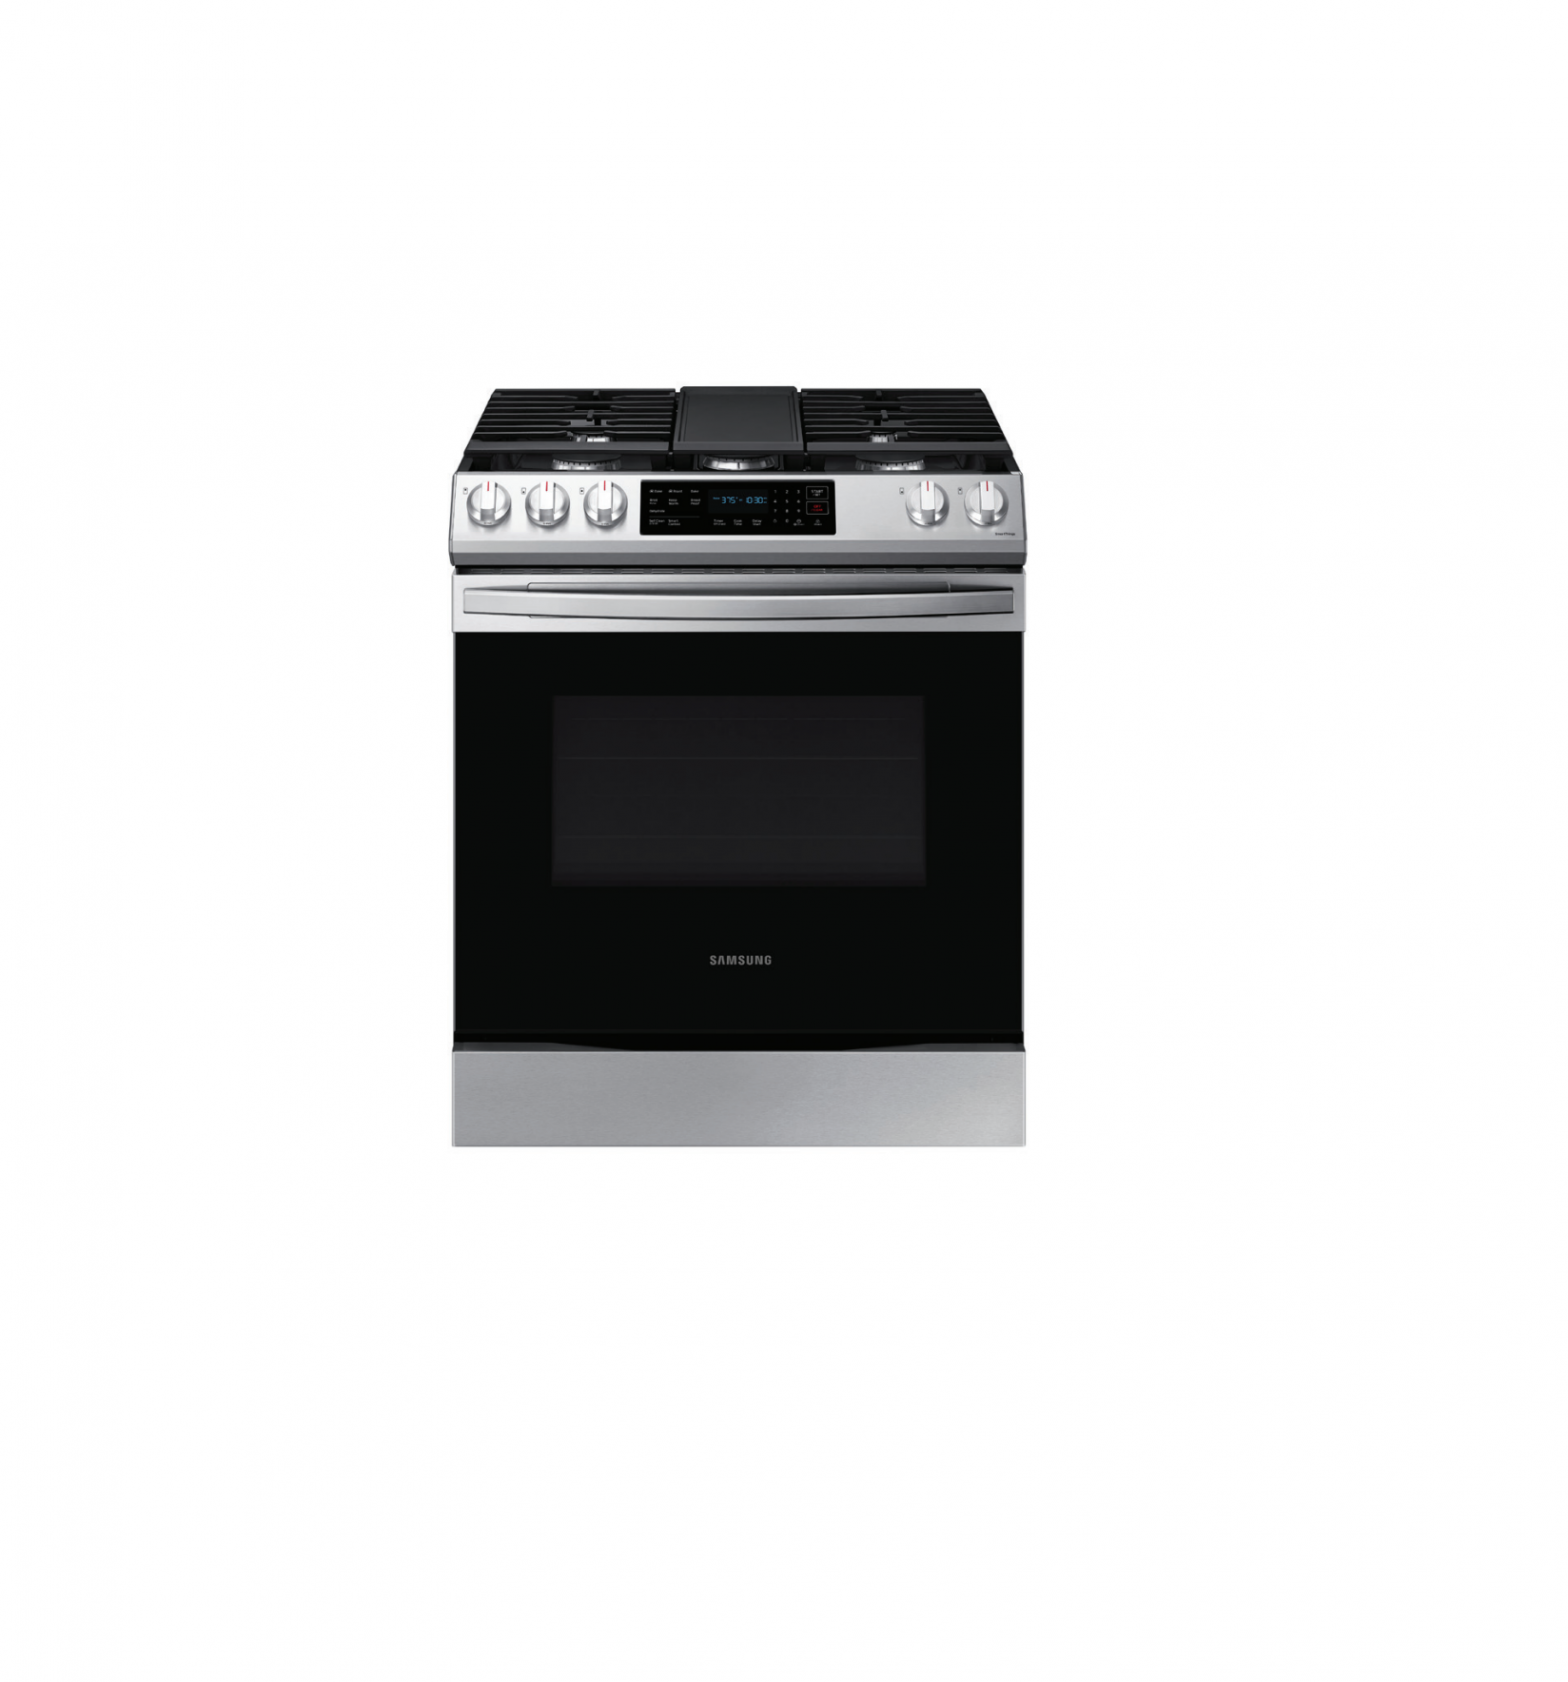 SAMSUNG Front Control Slide-in Gas Range with Convection User Manual